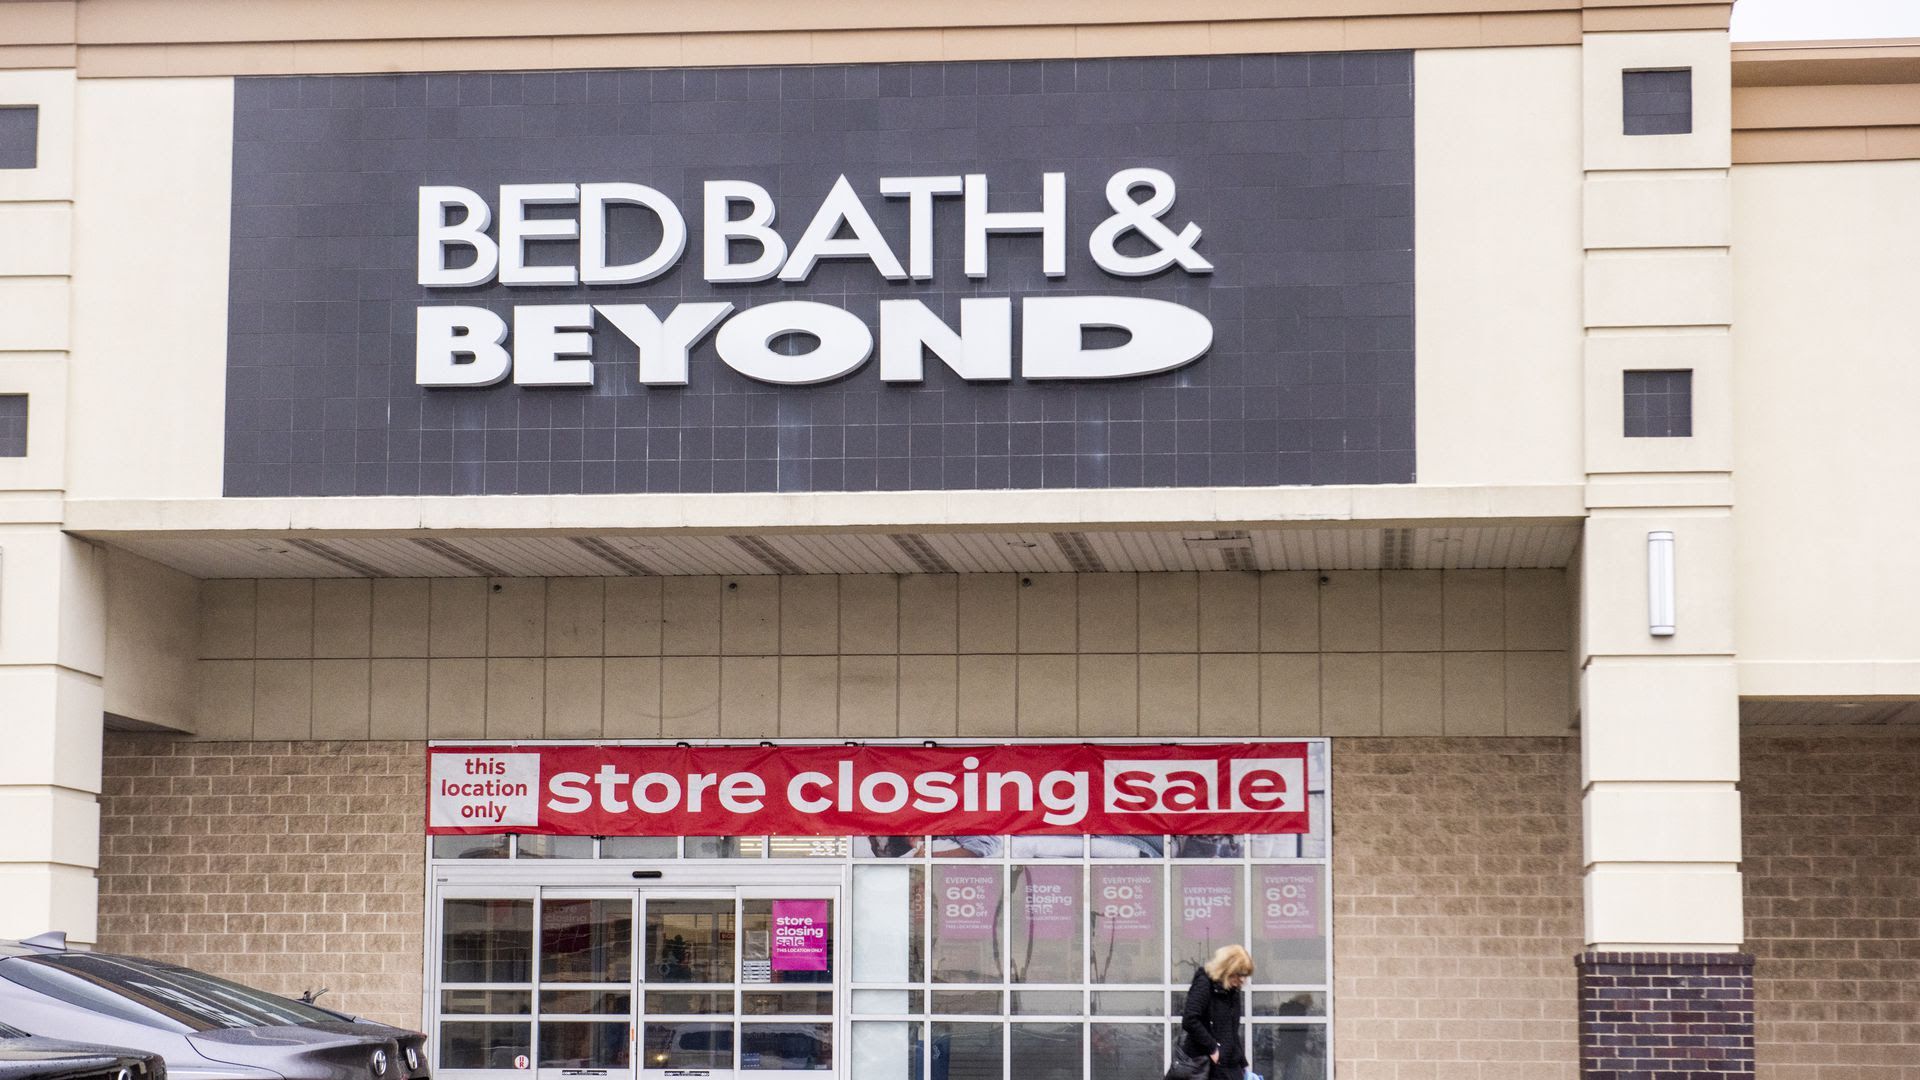 A Bed Bath & Beyond storefront with a store closing sign hanging above the entrance.